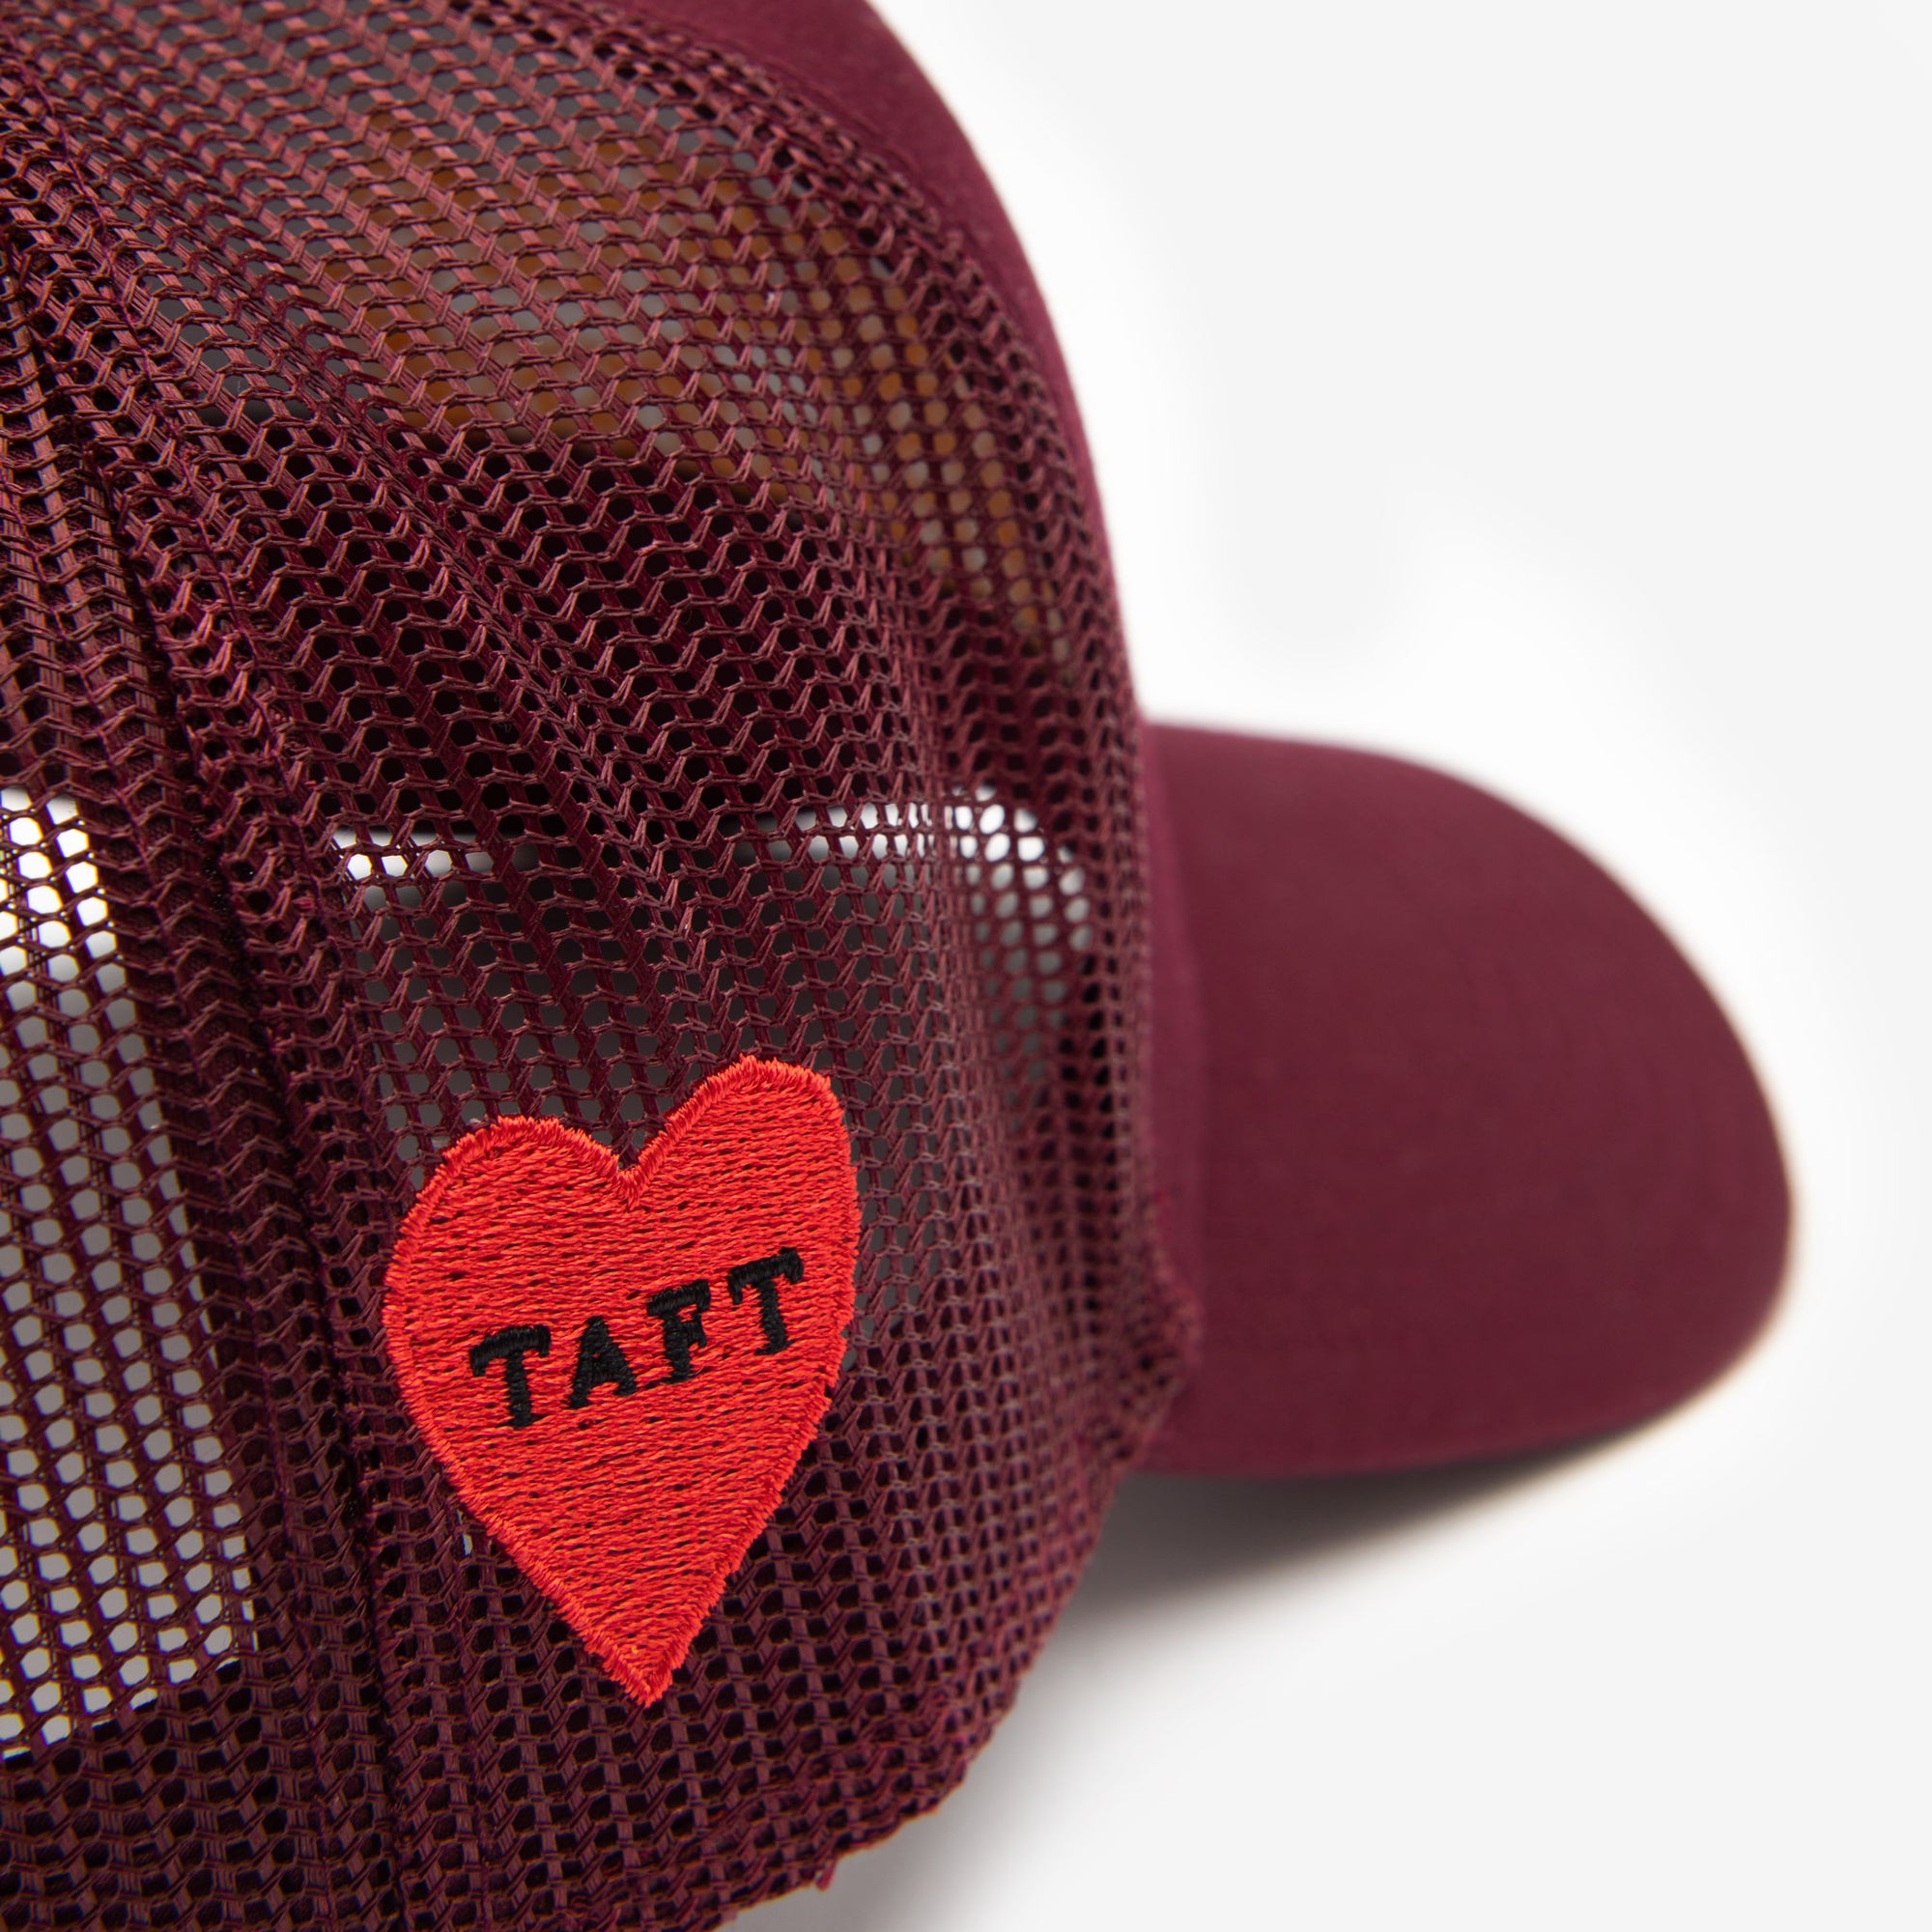 Take Care Hat in Maroon